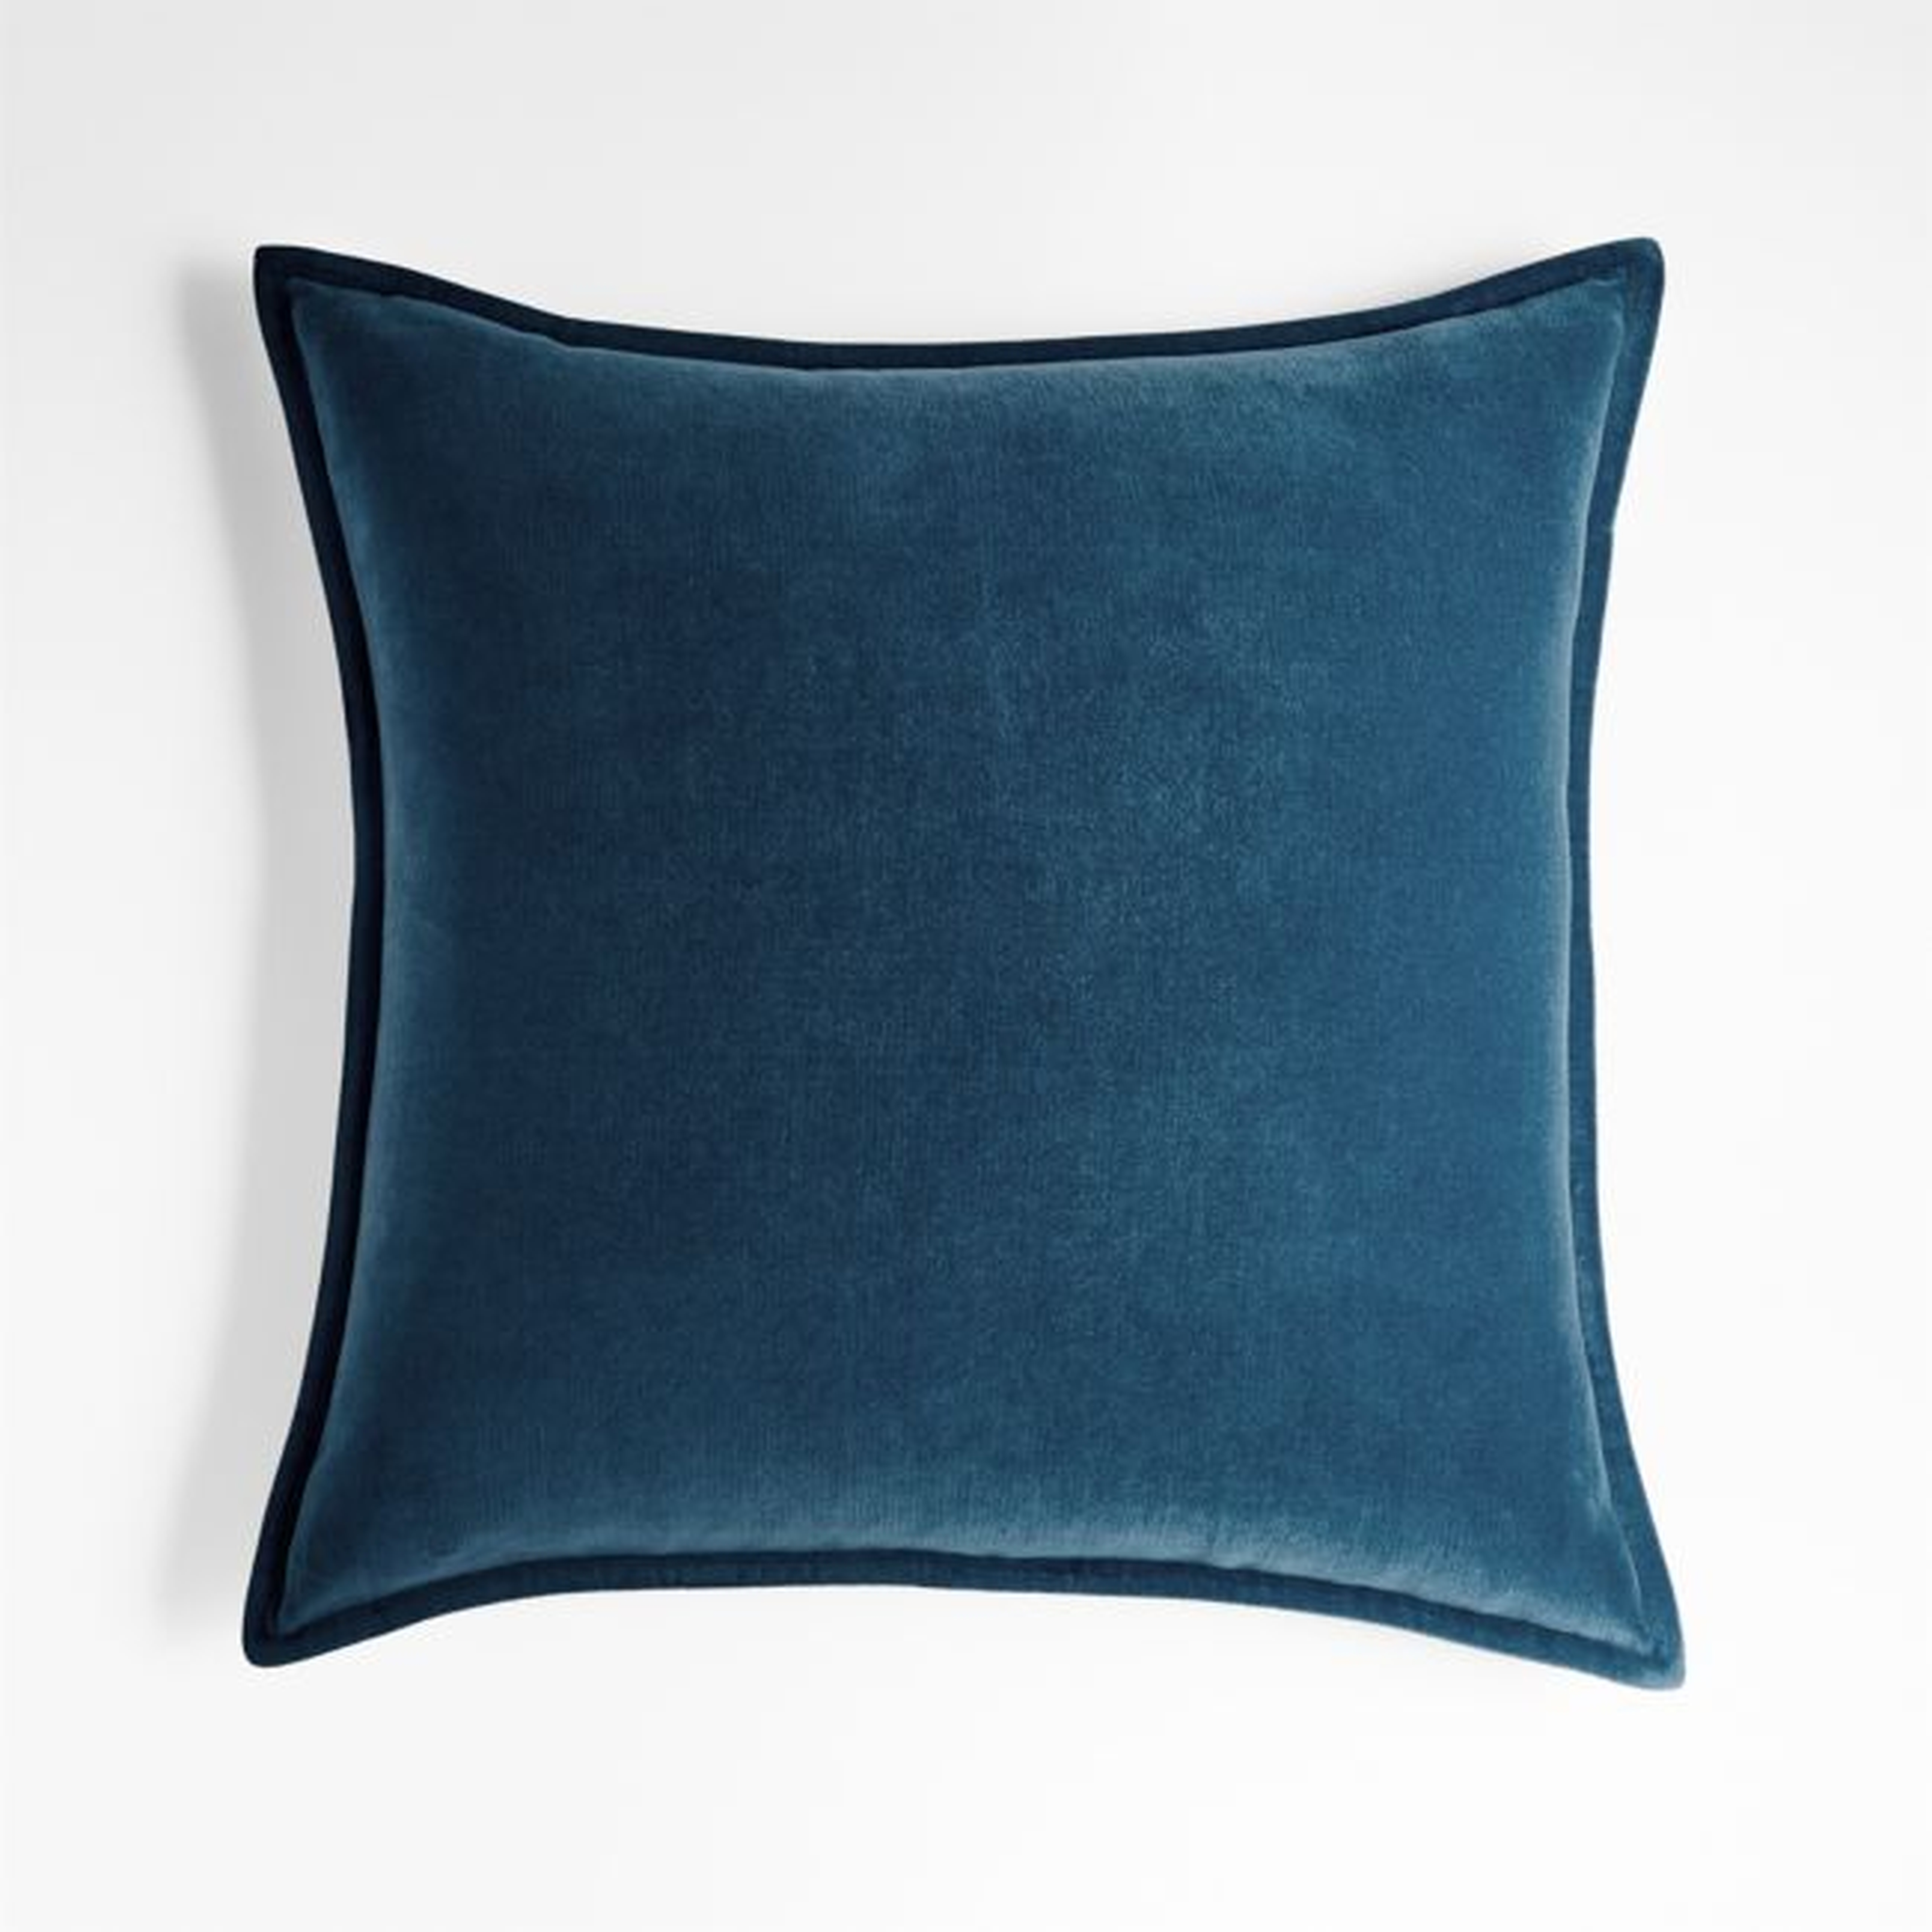 Washed Cotton Velvet Pillow, Deep Sea, 20" x 20" - Crate and Barrel